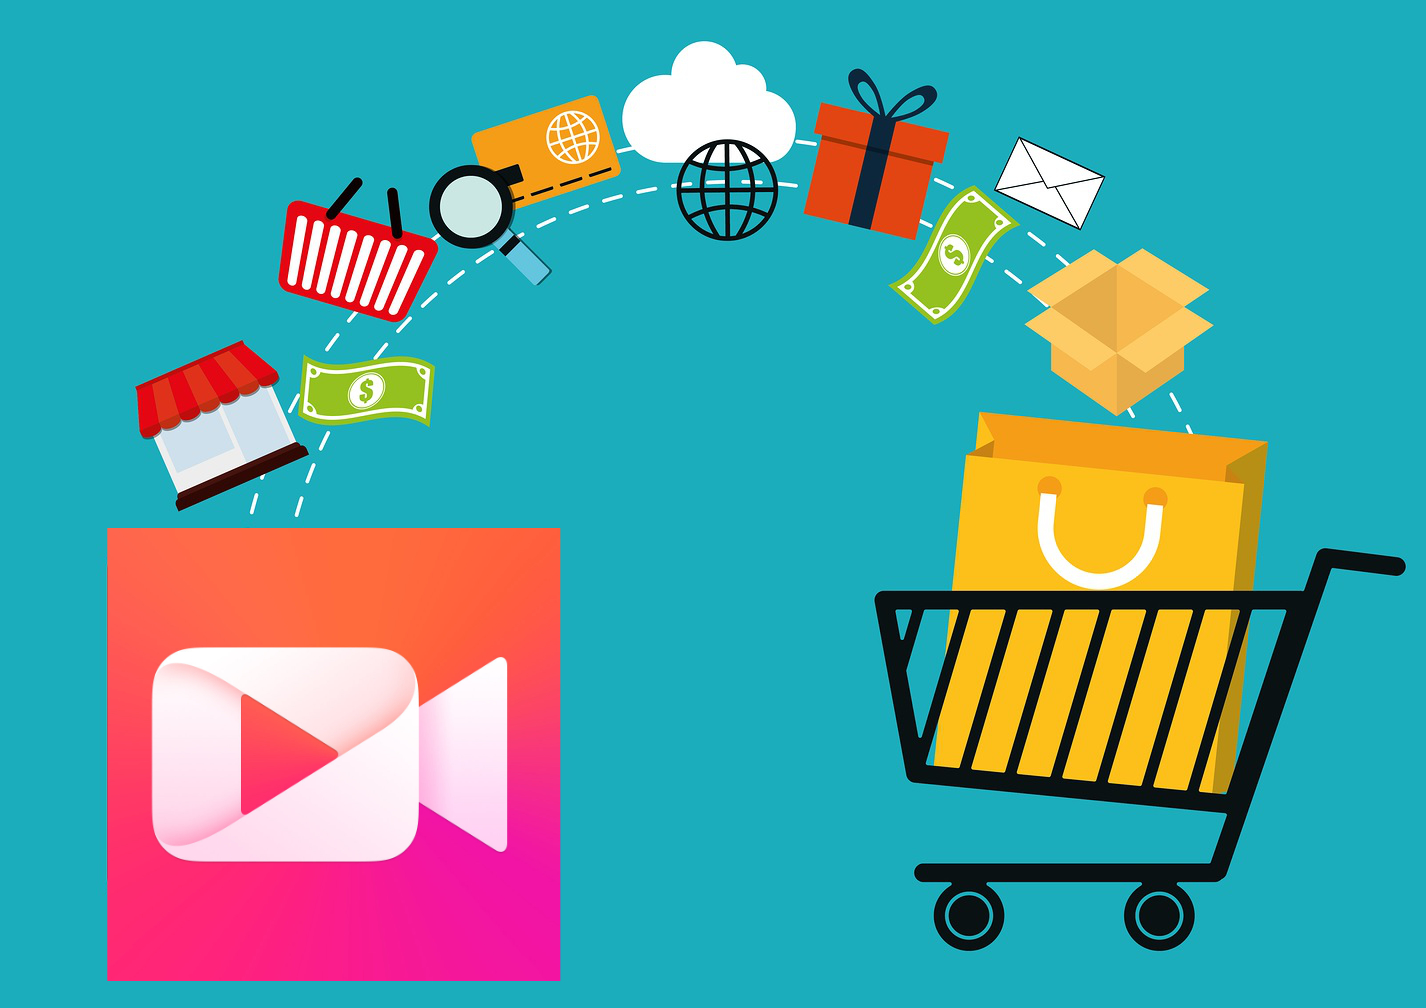 Meipai Video Ecommerce Tags: Big Deal for KOL Marketing